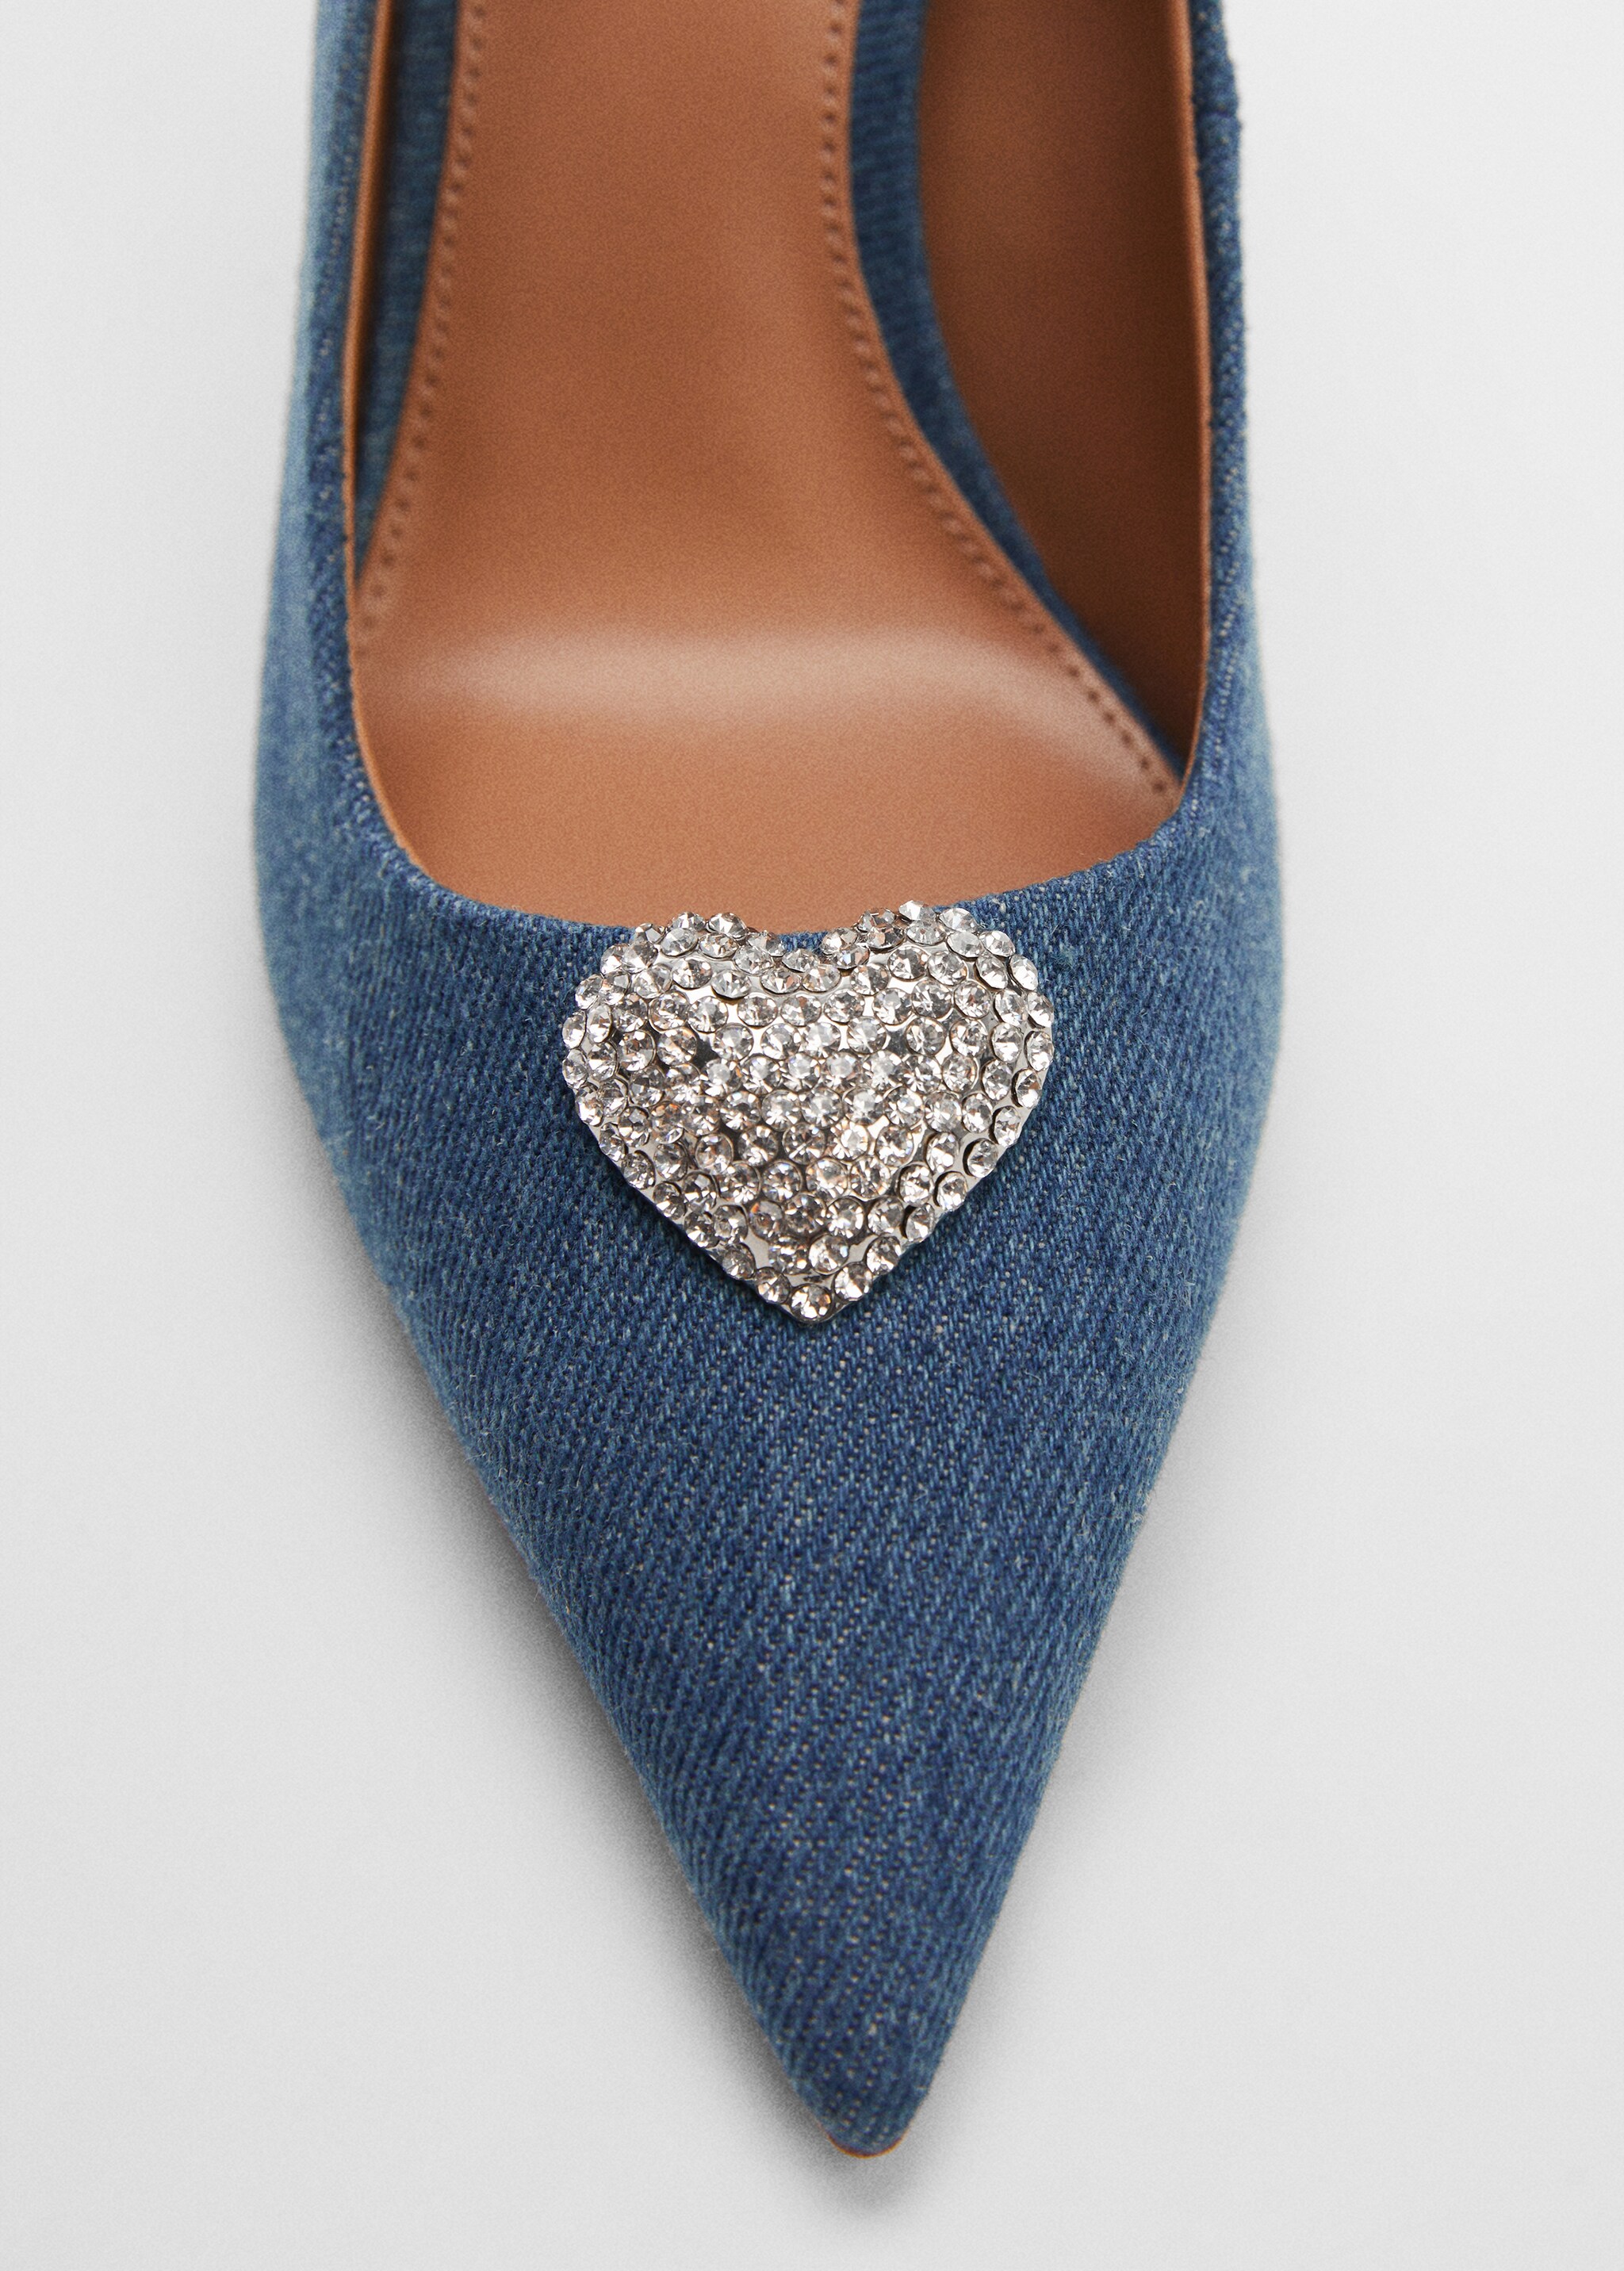 Denim shoes with rhinestone detail - Details of the article 2